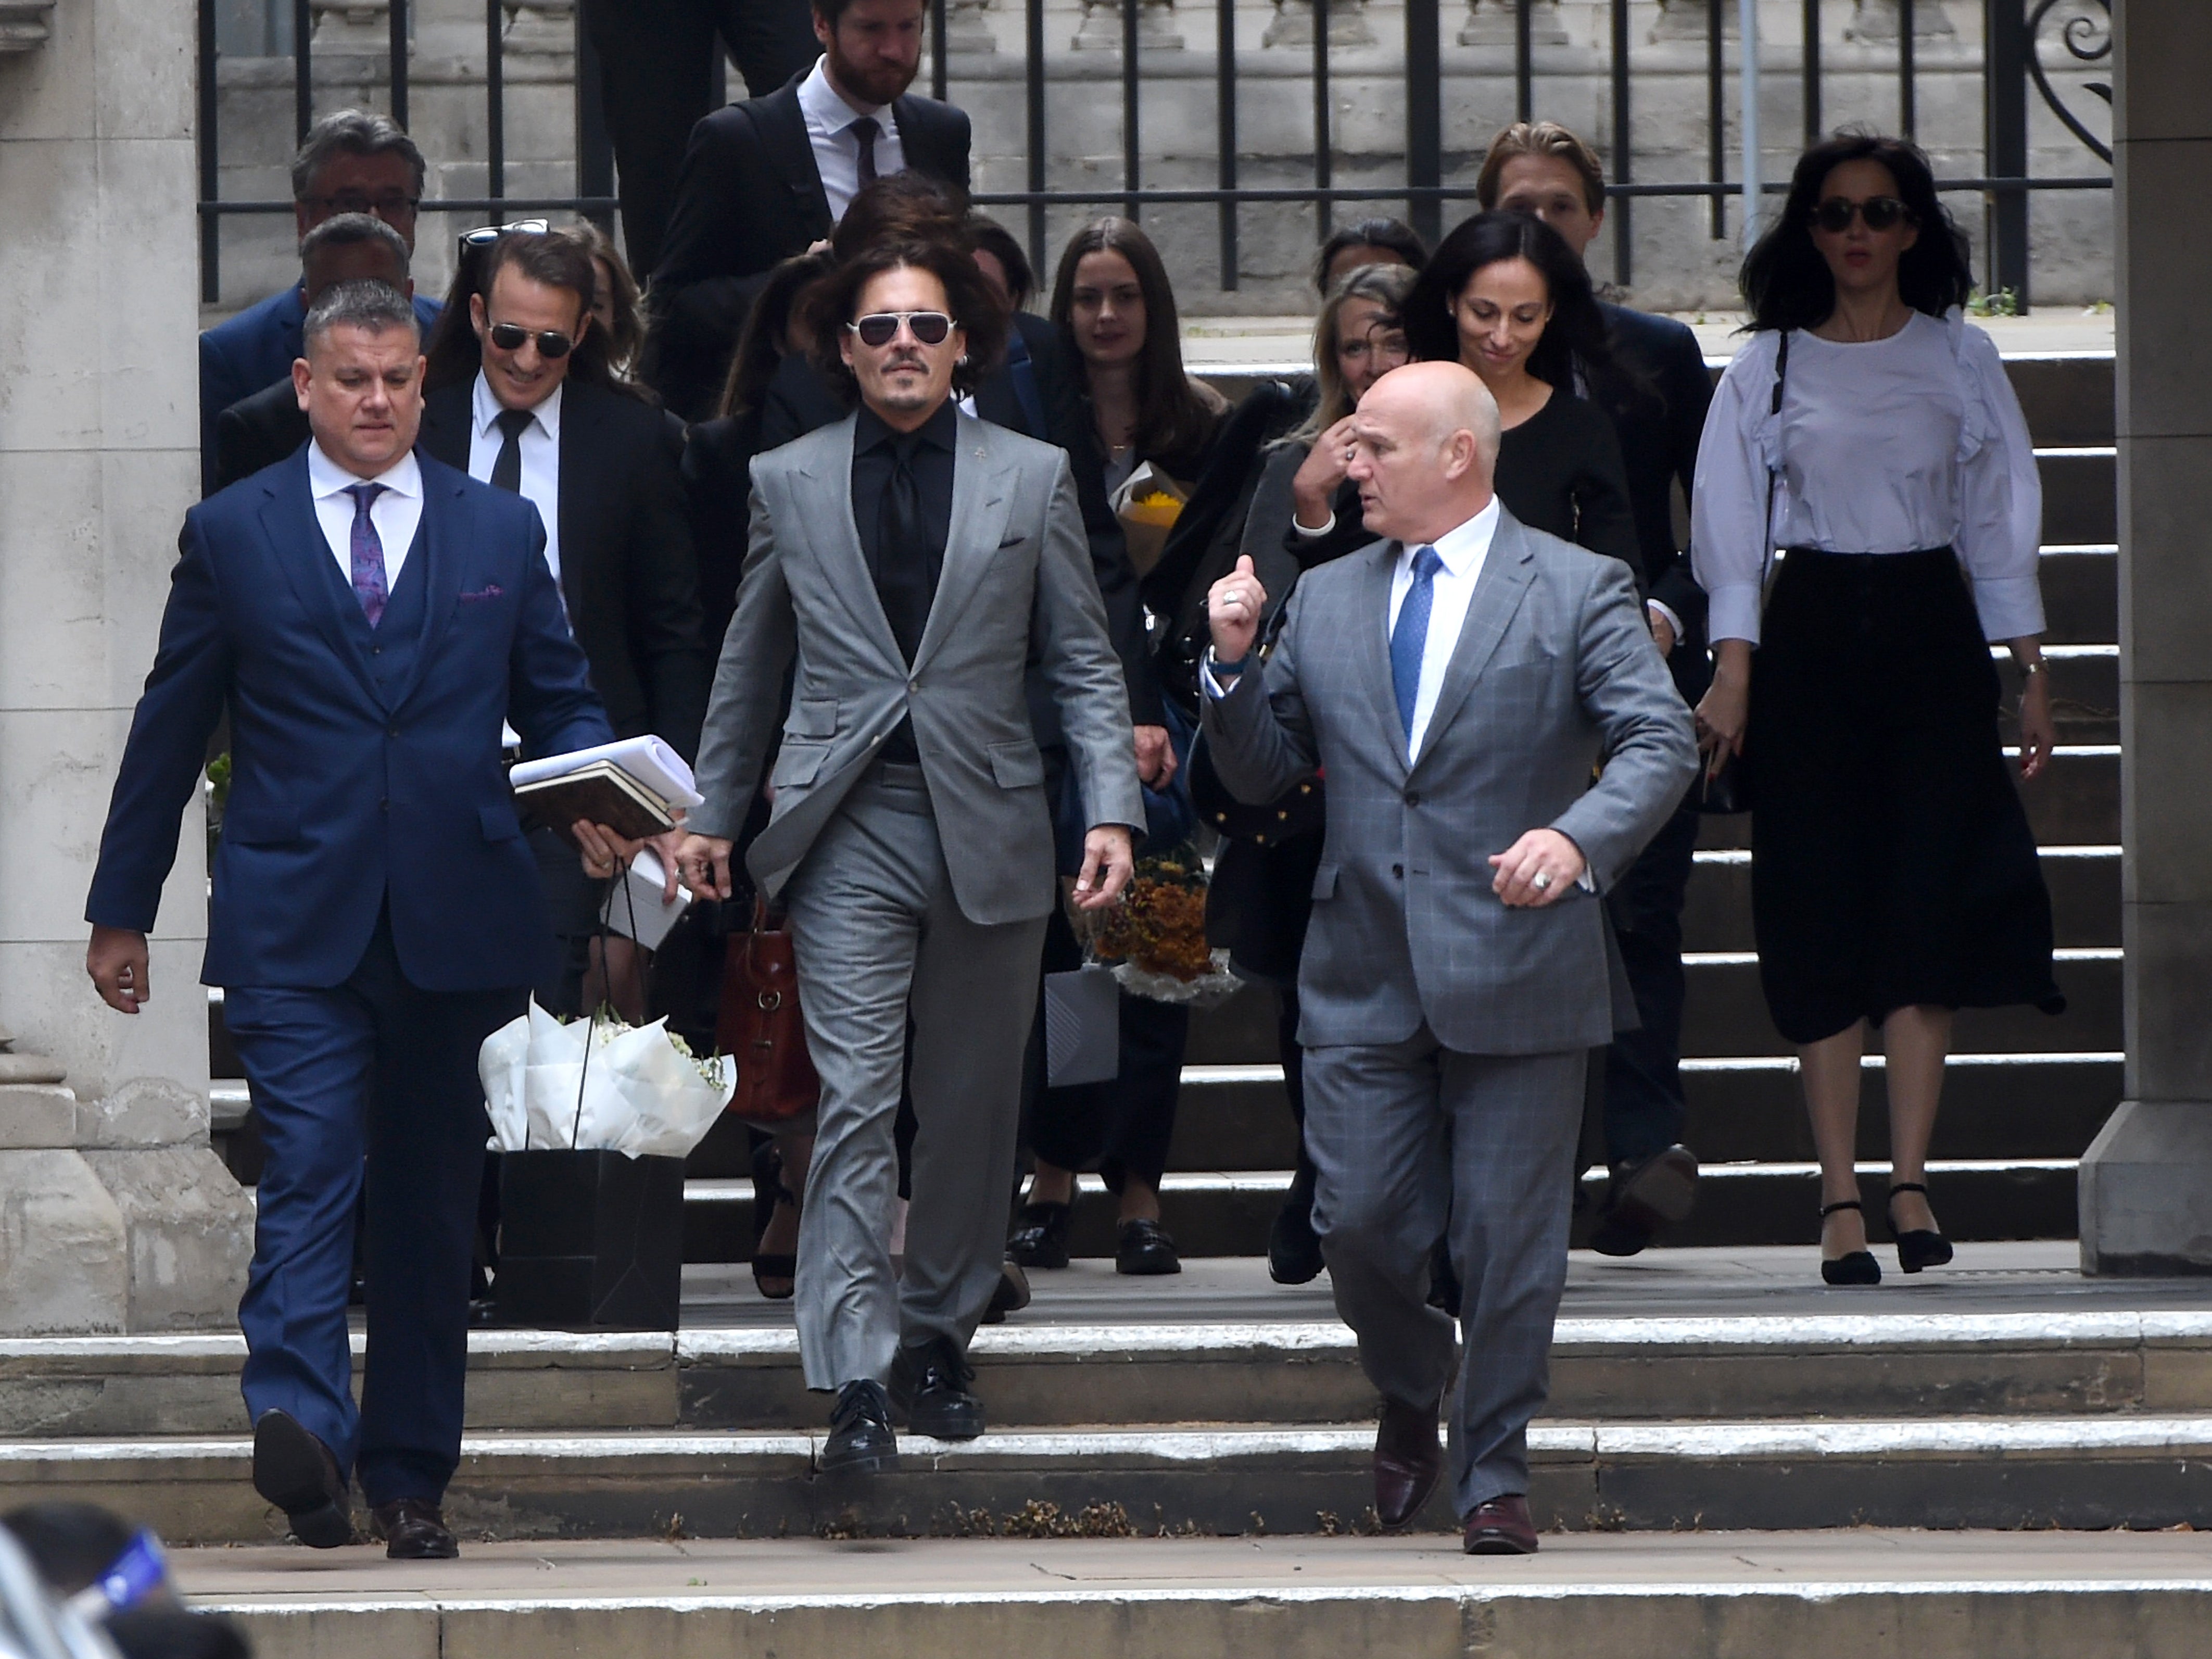 Johnny Depp departs from the court on 28 July 2020 in London